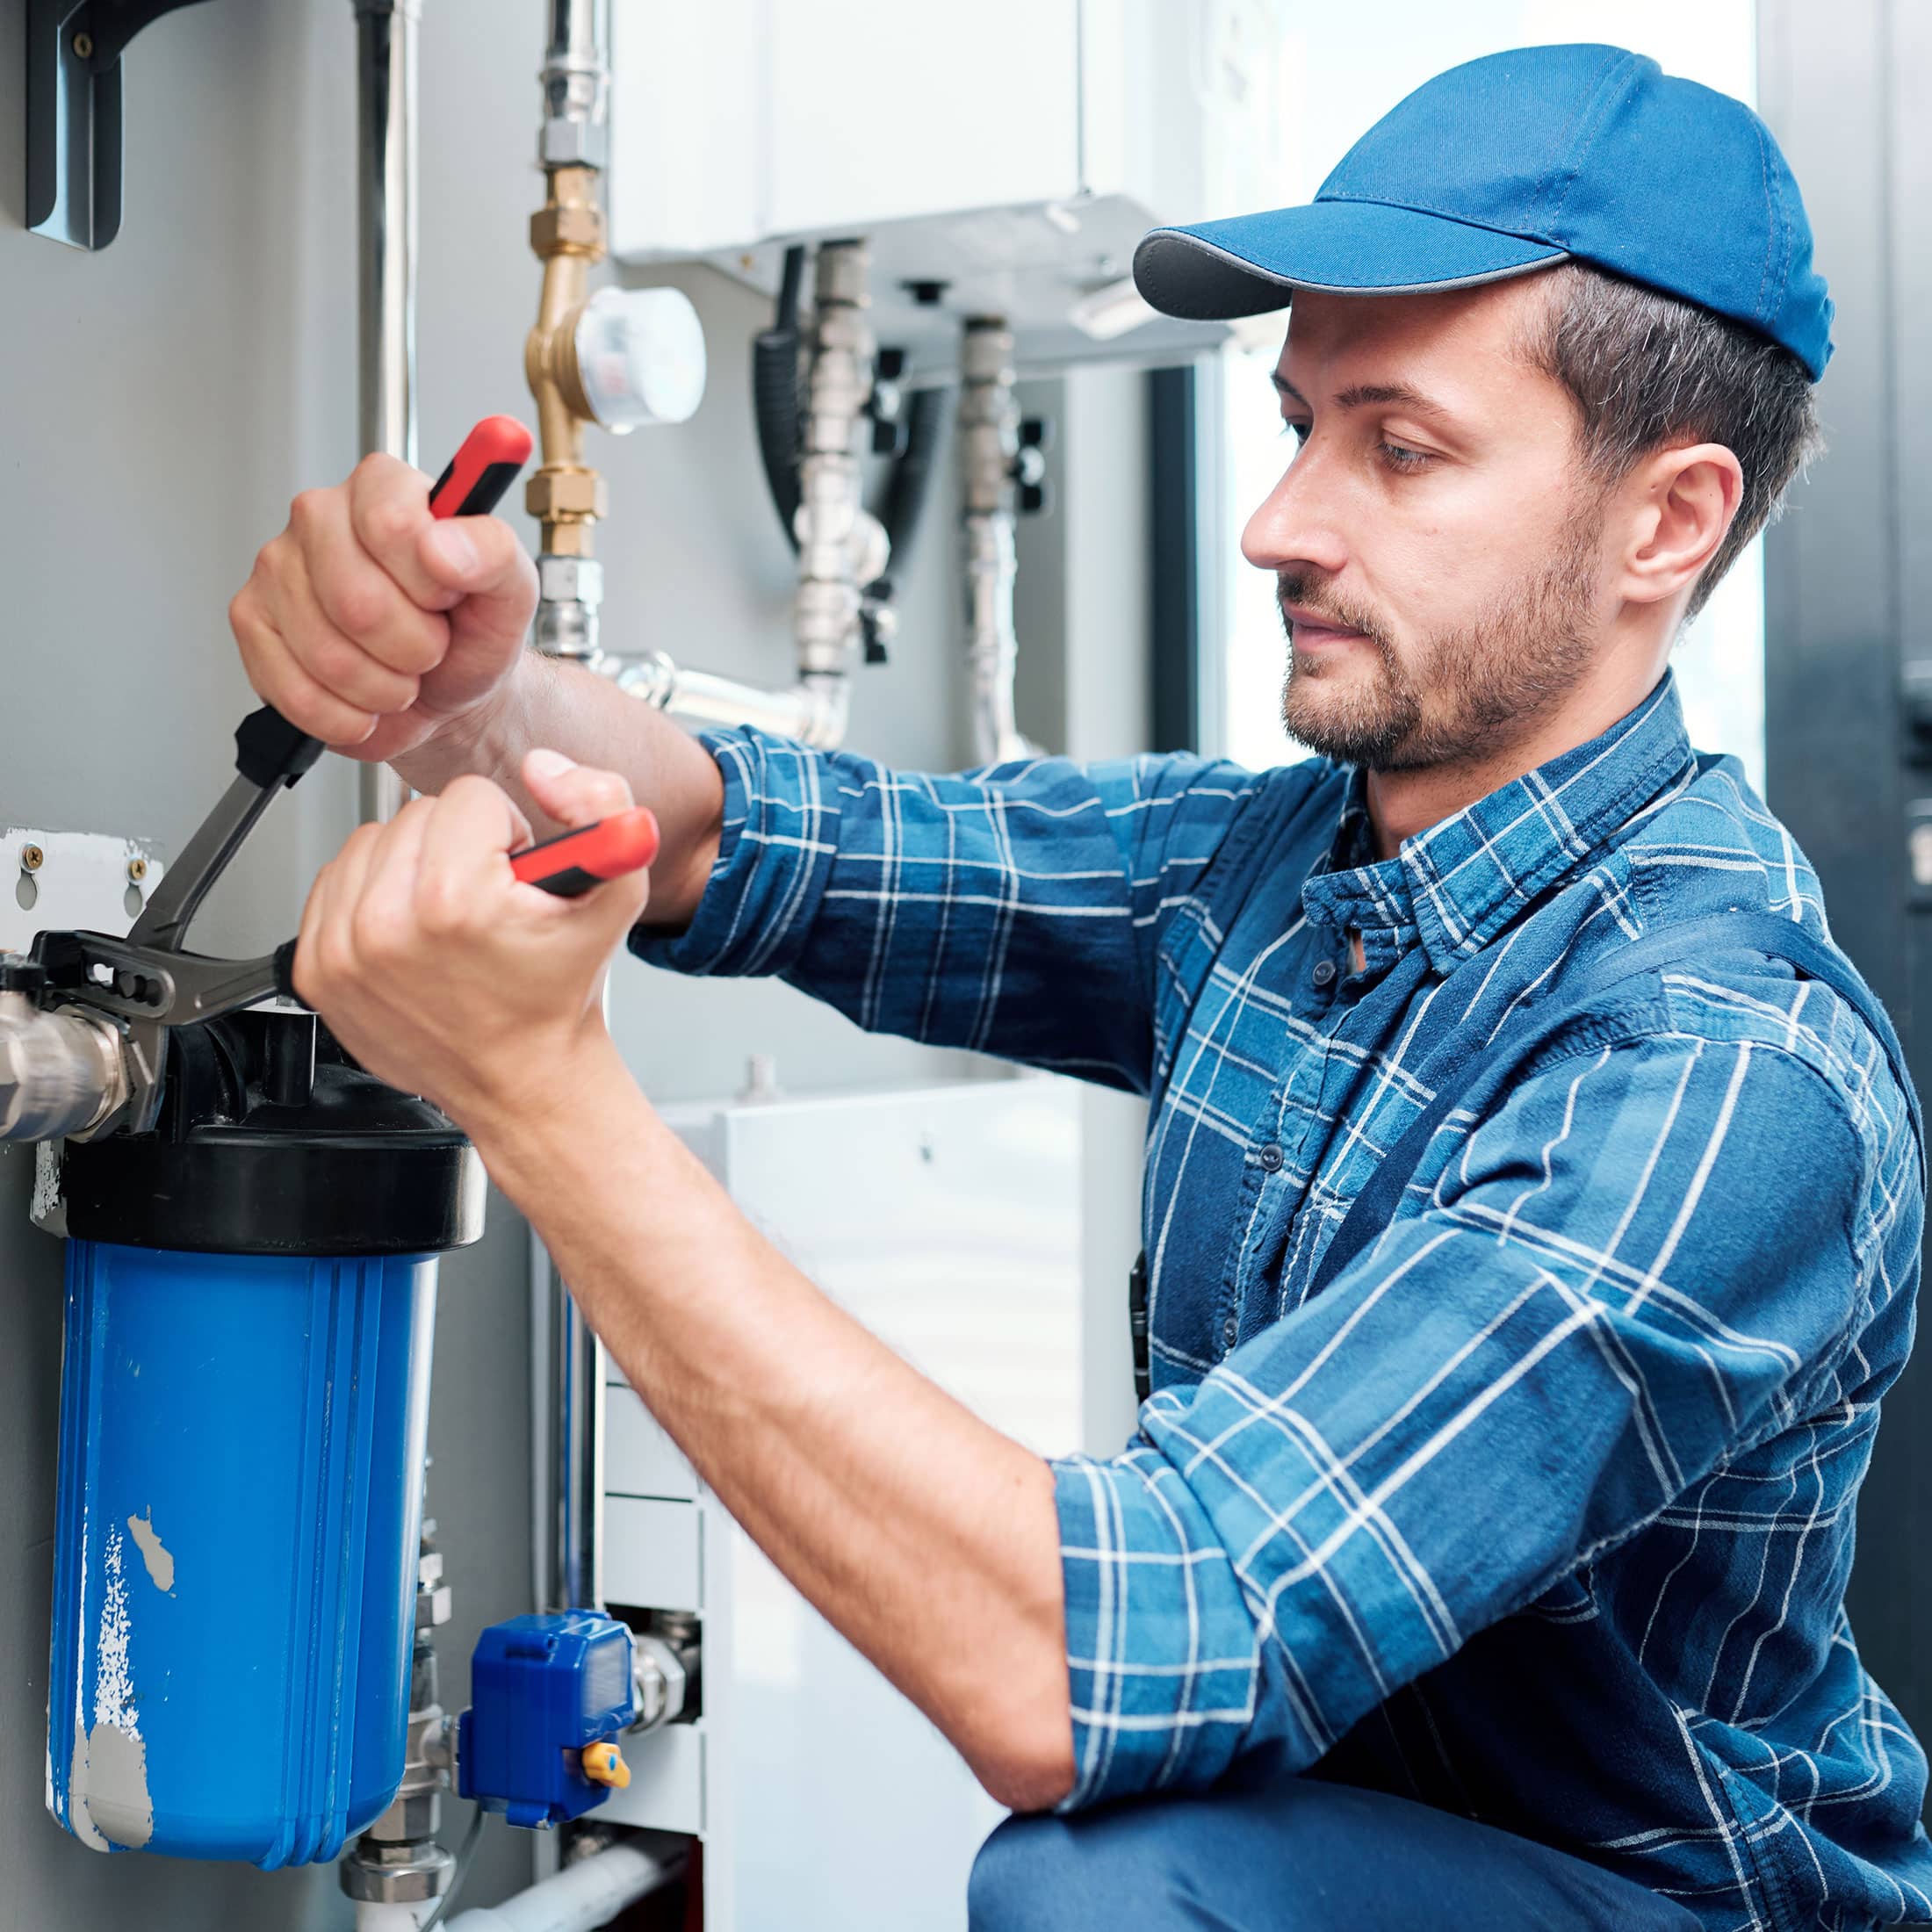 Workwear using pliers while installing water filtration system